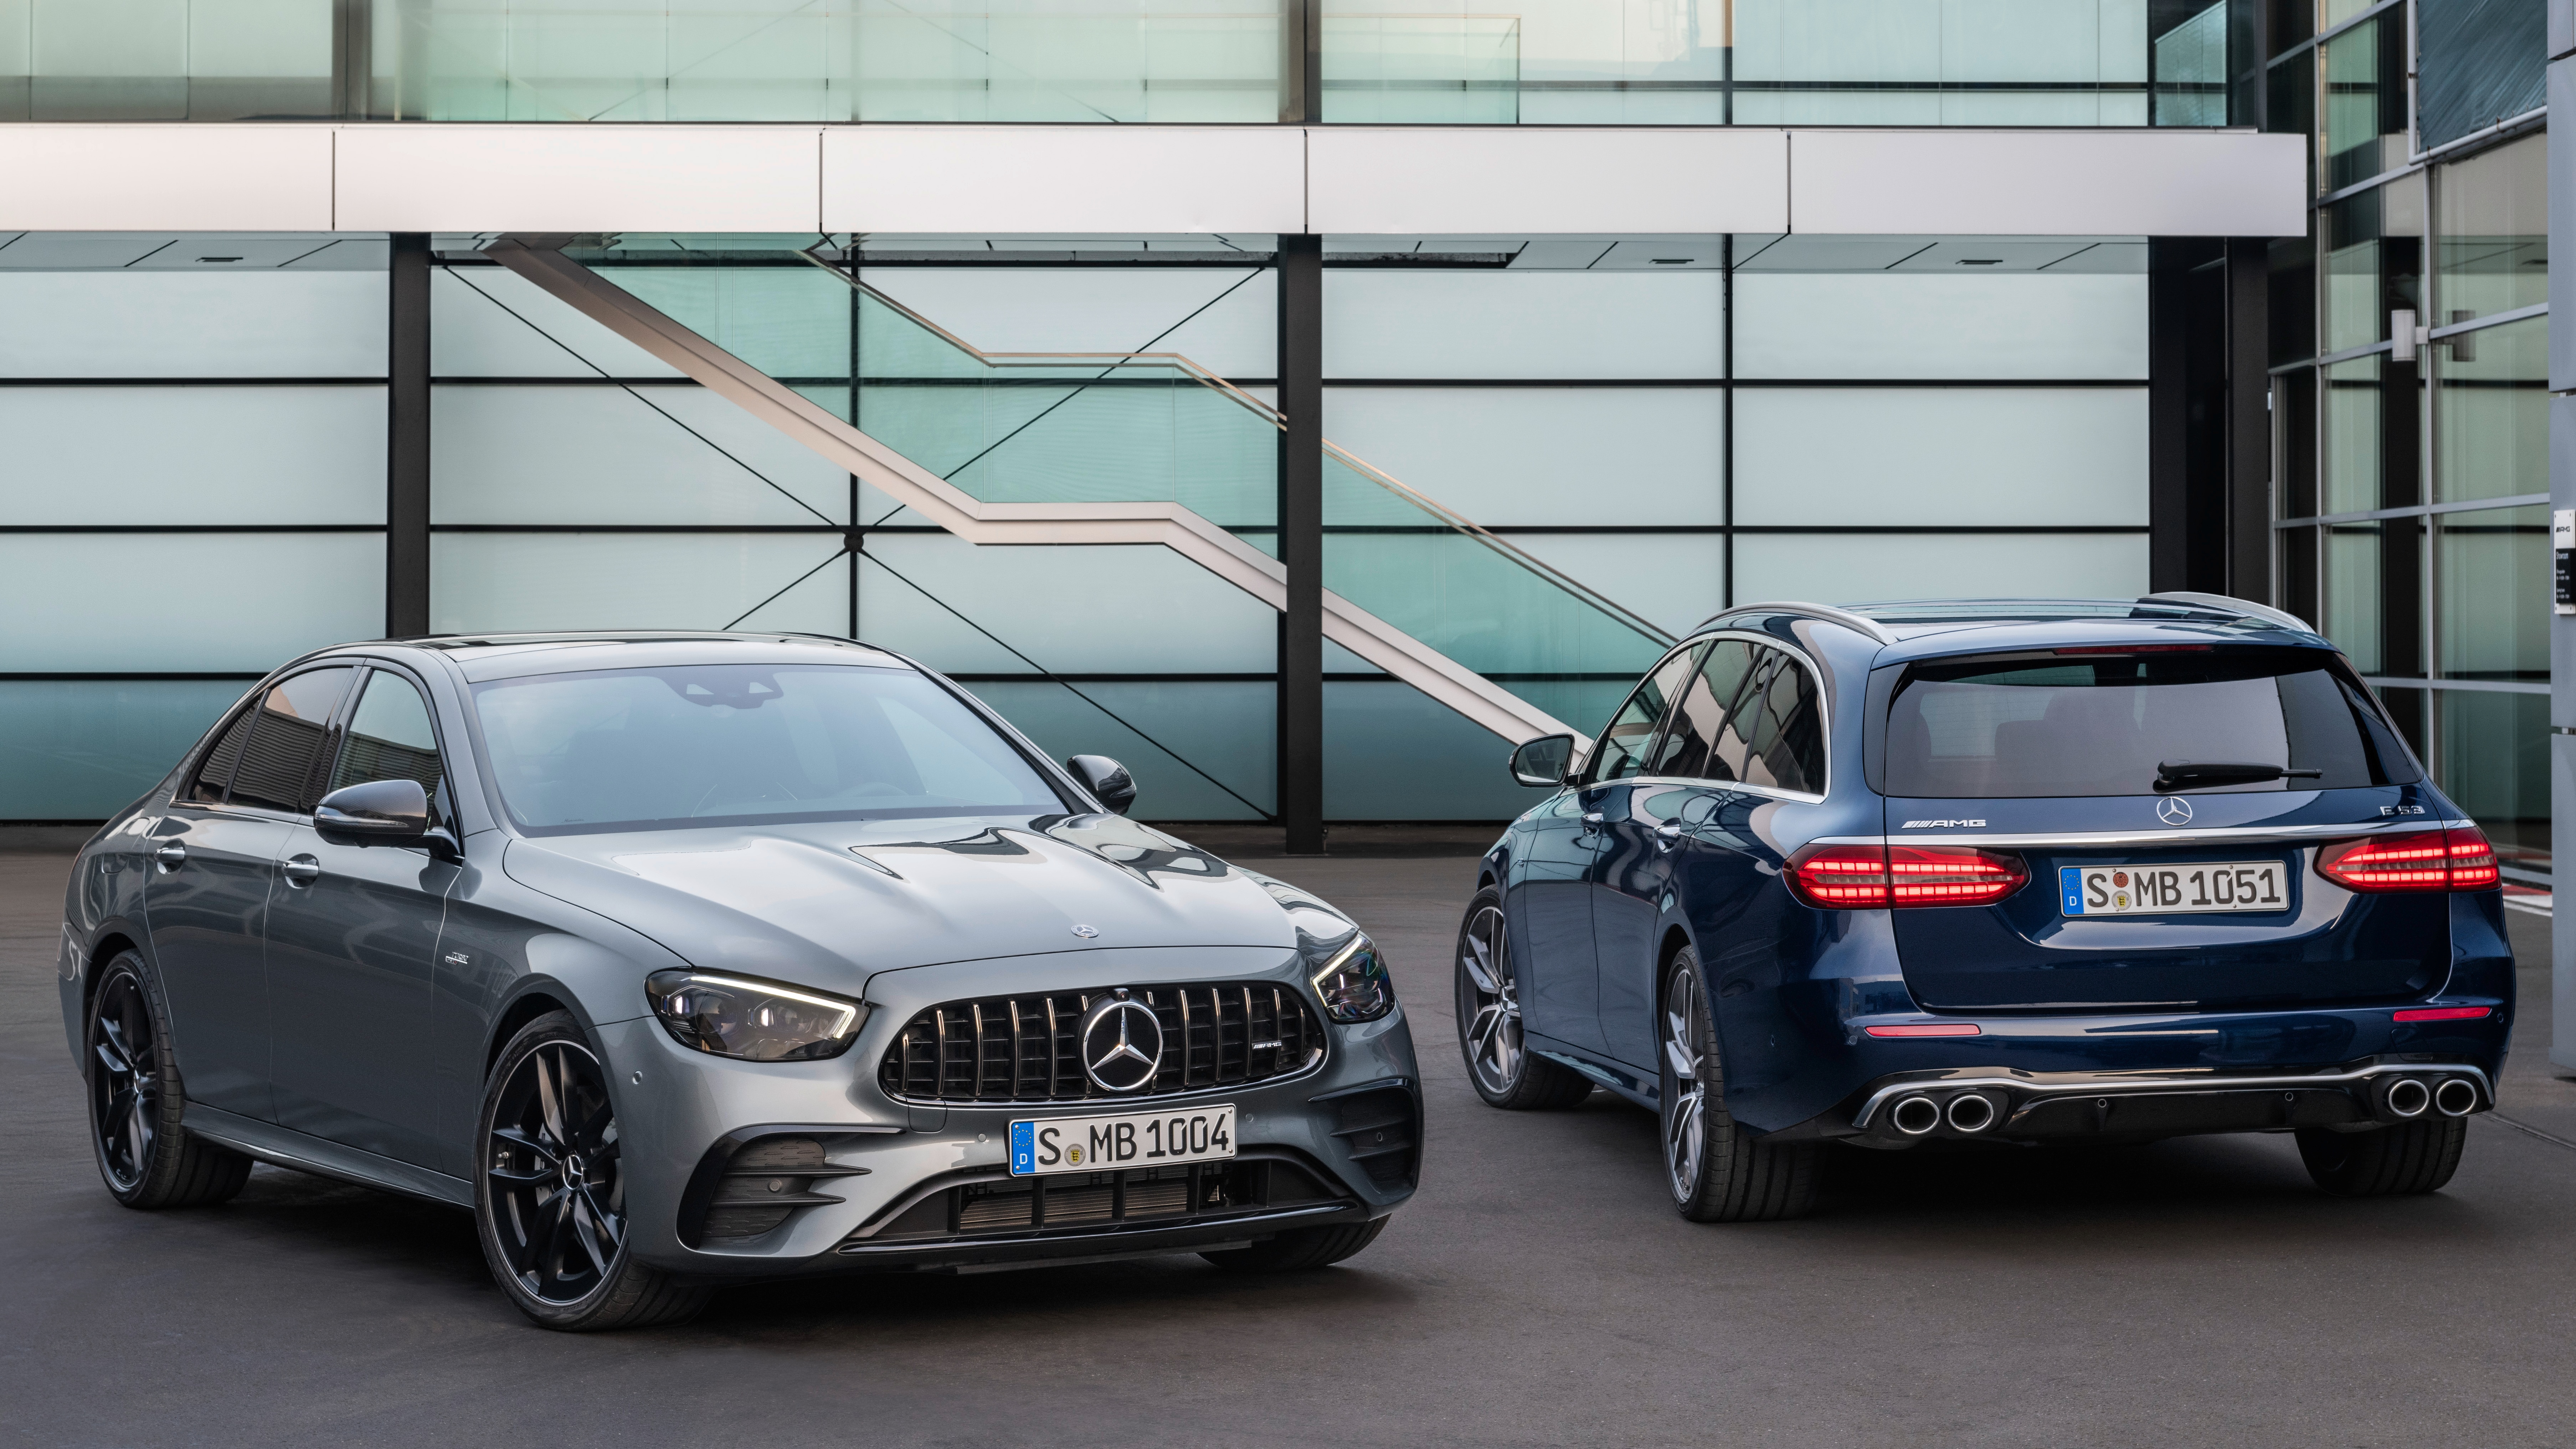 News - 2021 Mercedes-AMG E53 4Matic+ Revealed In Saloon ...